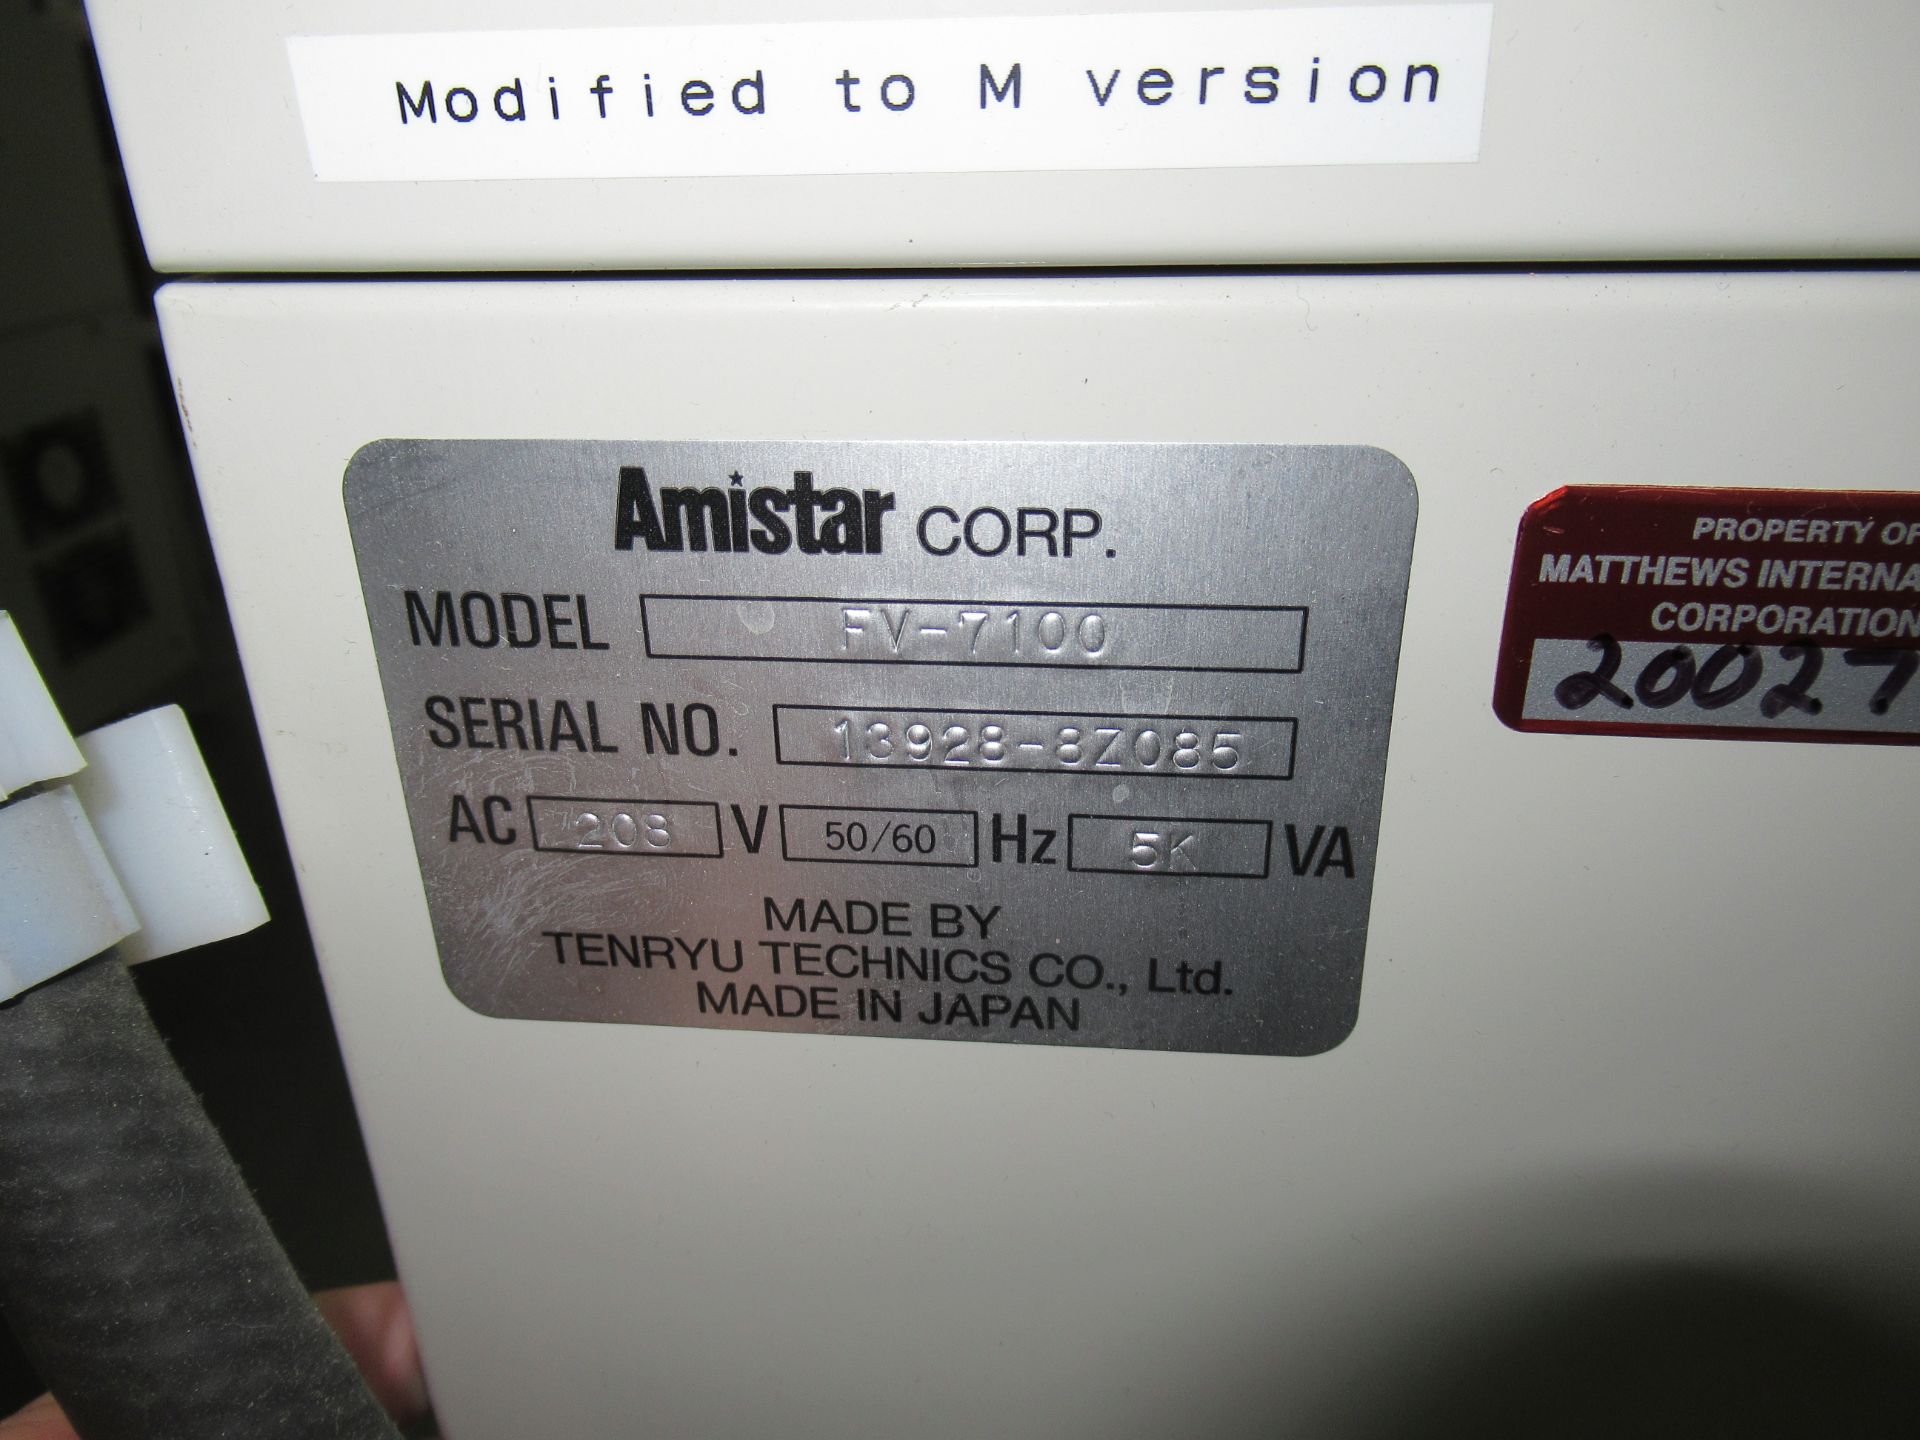 AMISTAR MDL. FV-7100 PICK AND PLACE, S/N: 13928-8Z085 (AS IS, NEEDS SOME REPAIR) - Bild 5 aus 6